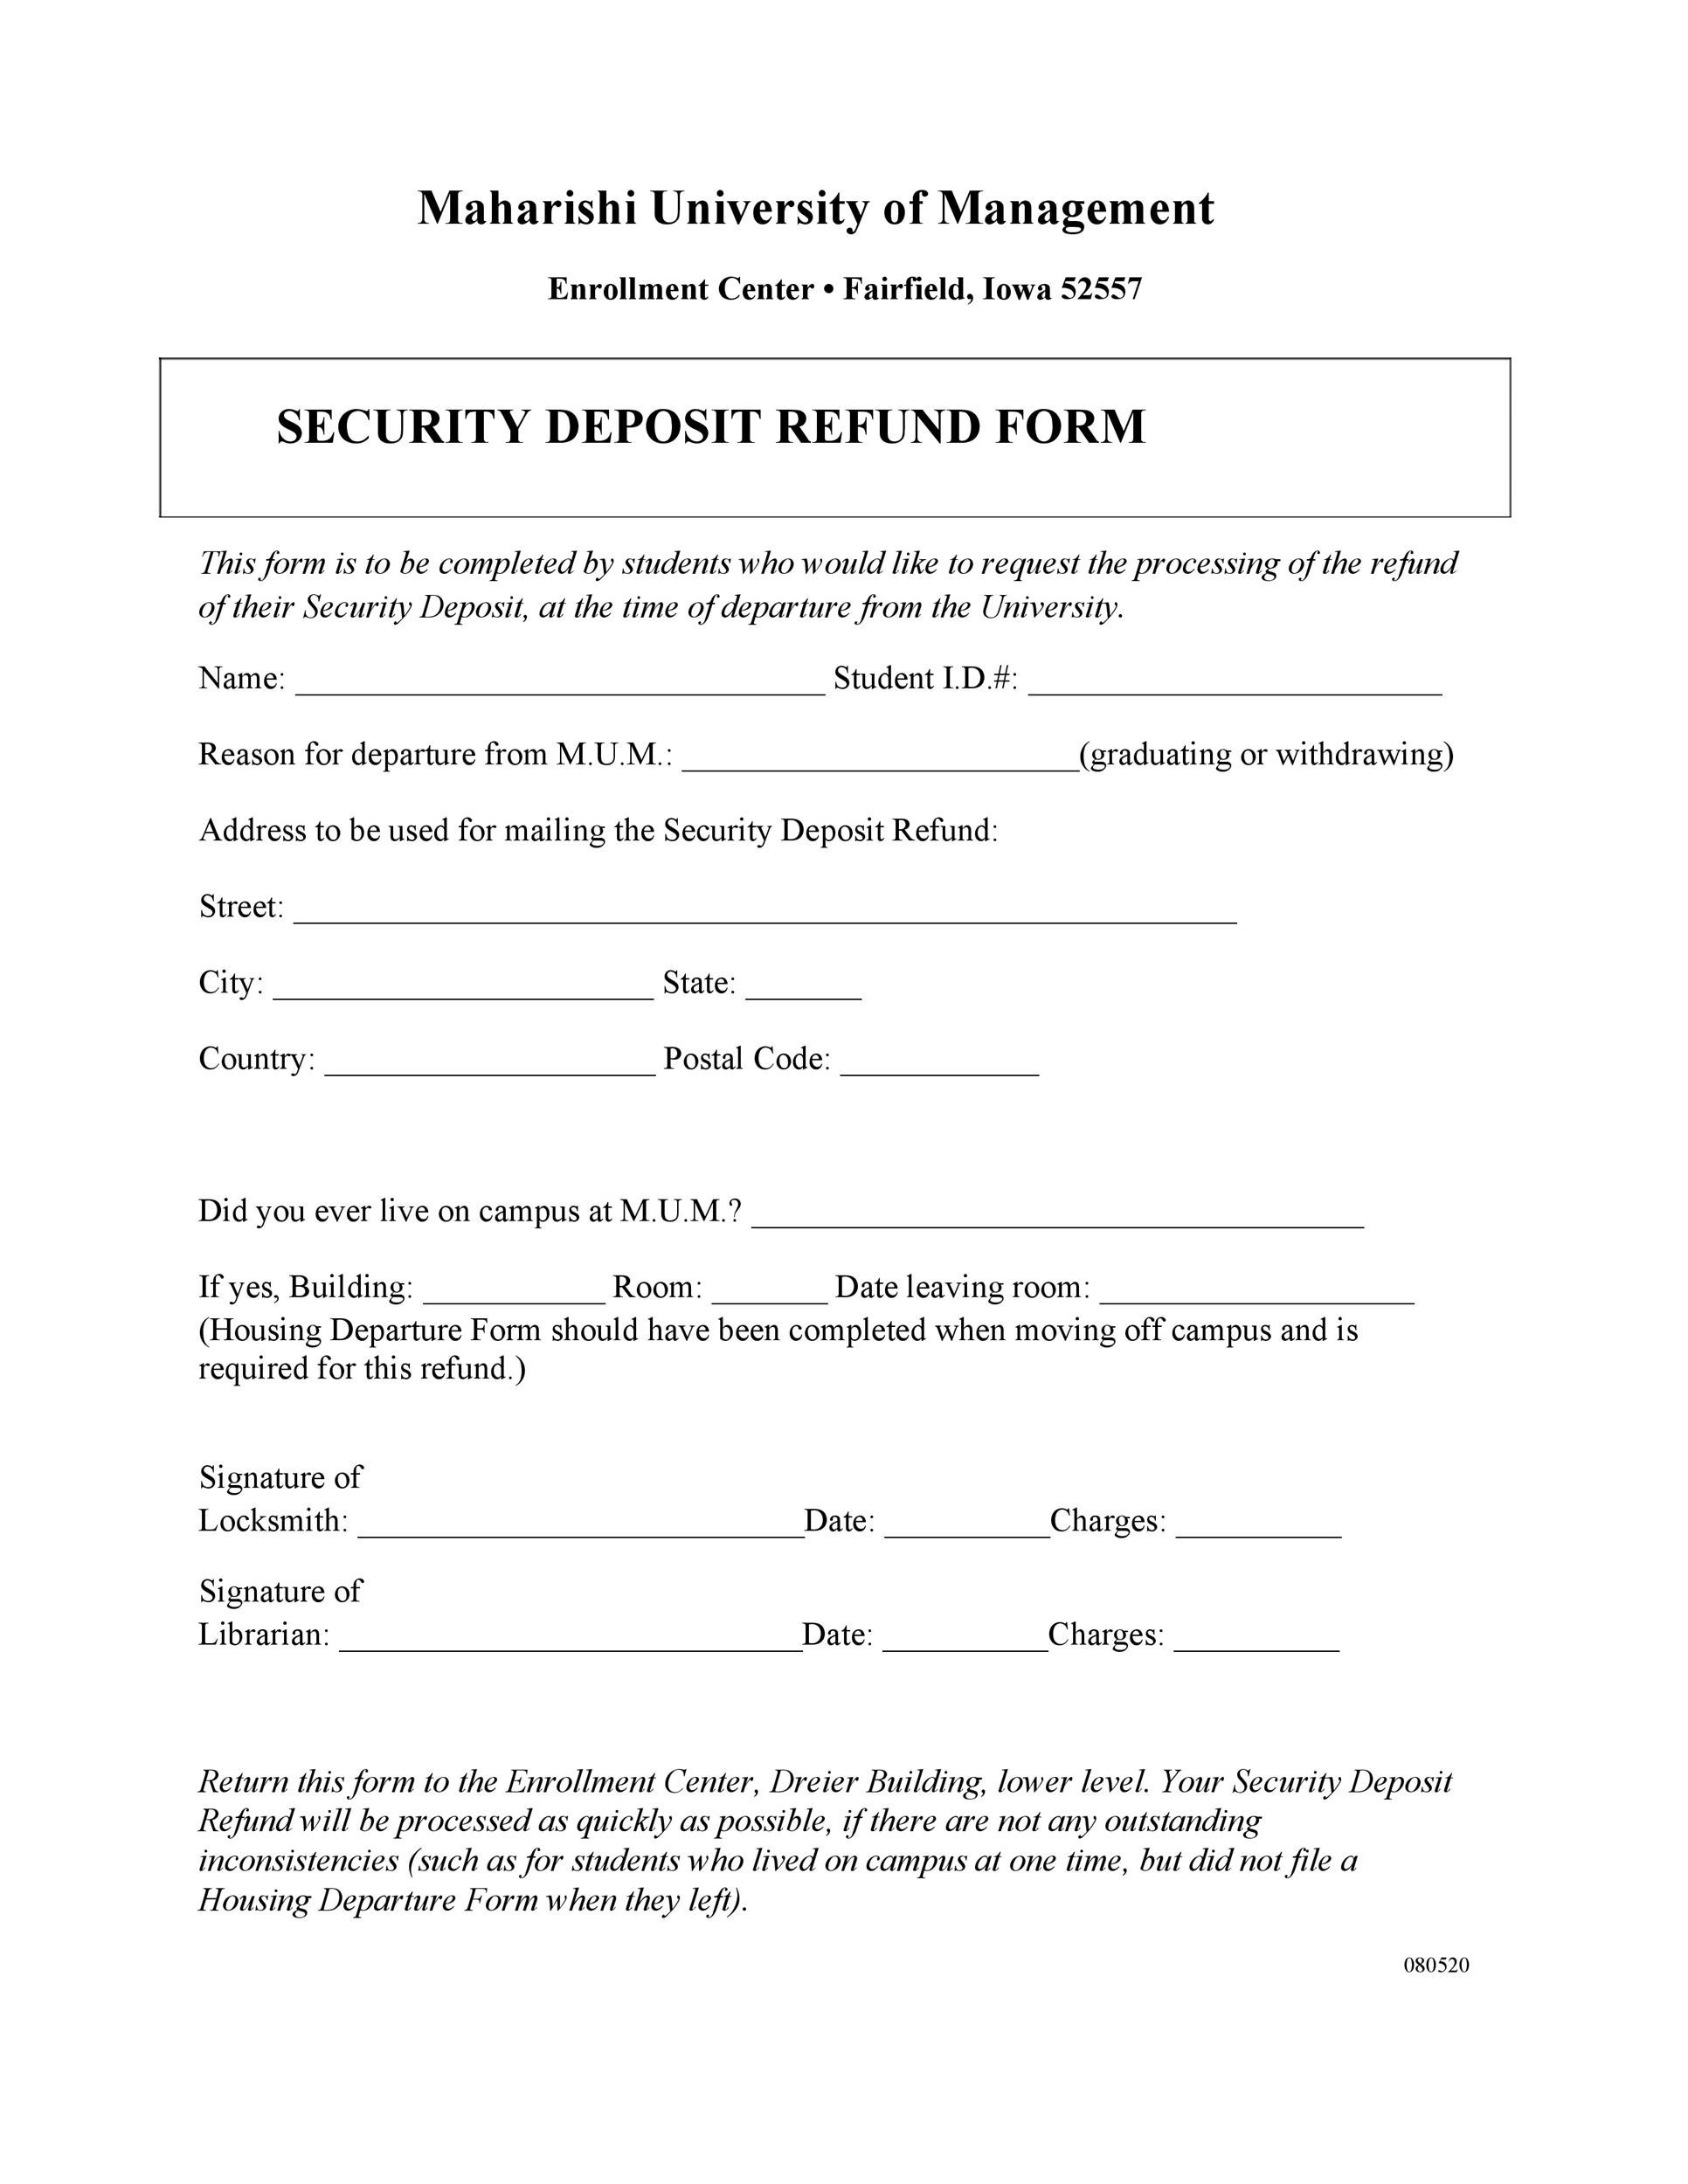 10 Effective Security Deposit Return Letters [MS Word] ᐅ TemplateLab With Landlord Security Deposit Return Form Inside Landlord Security Deposit Return Form